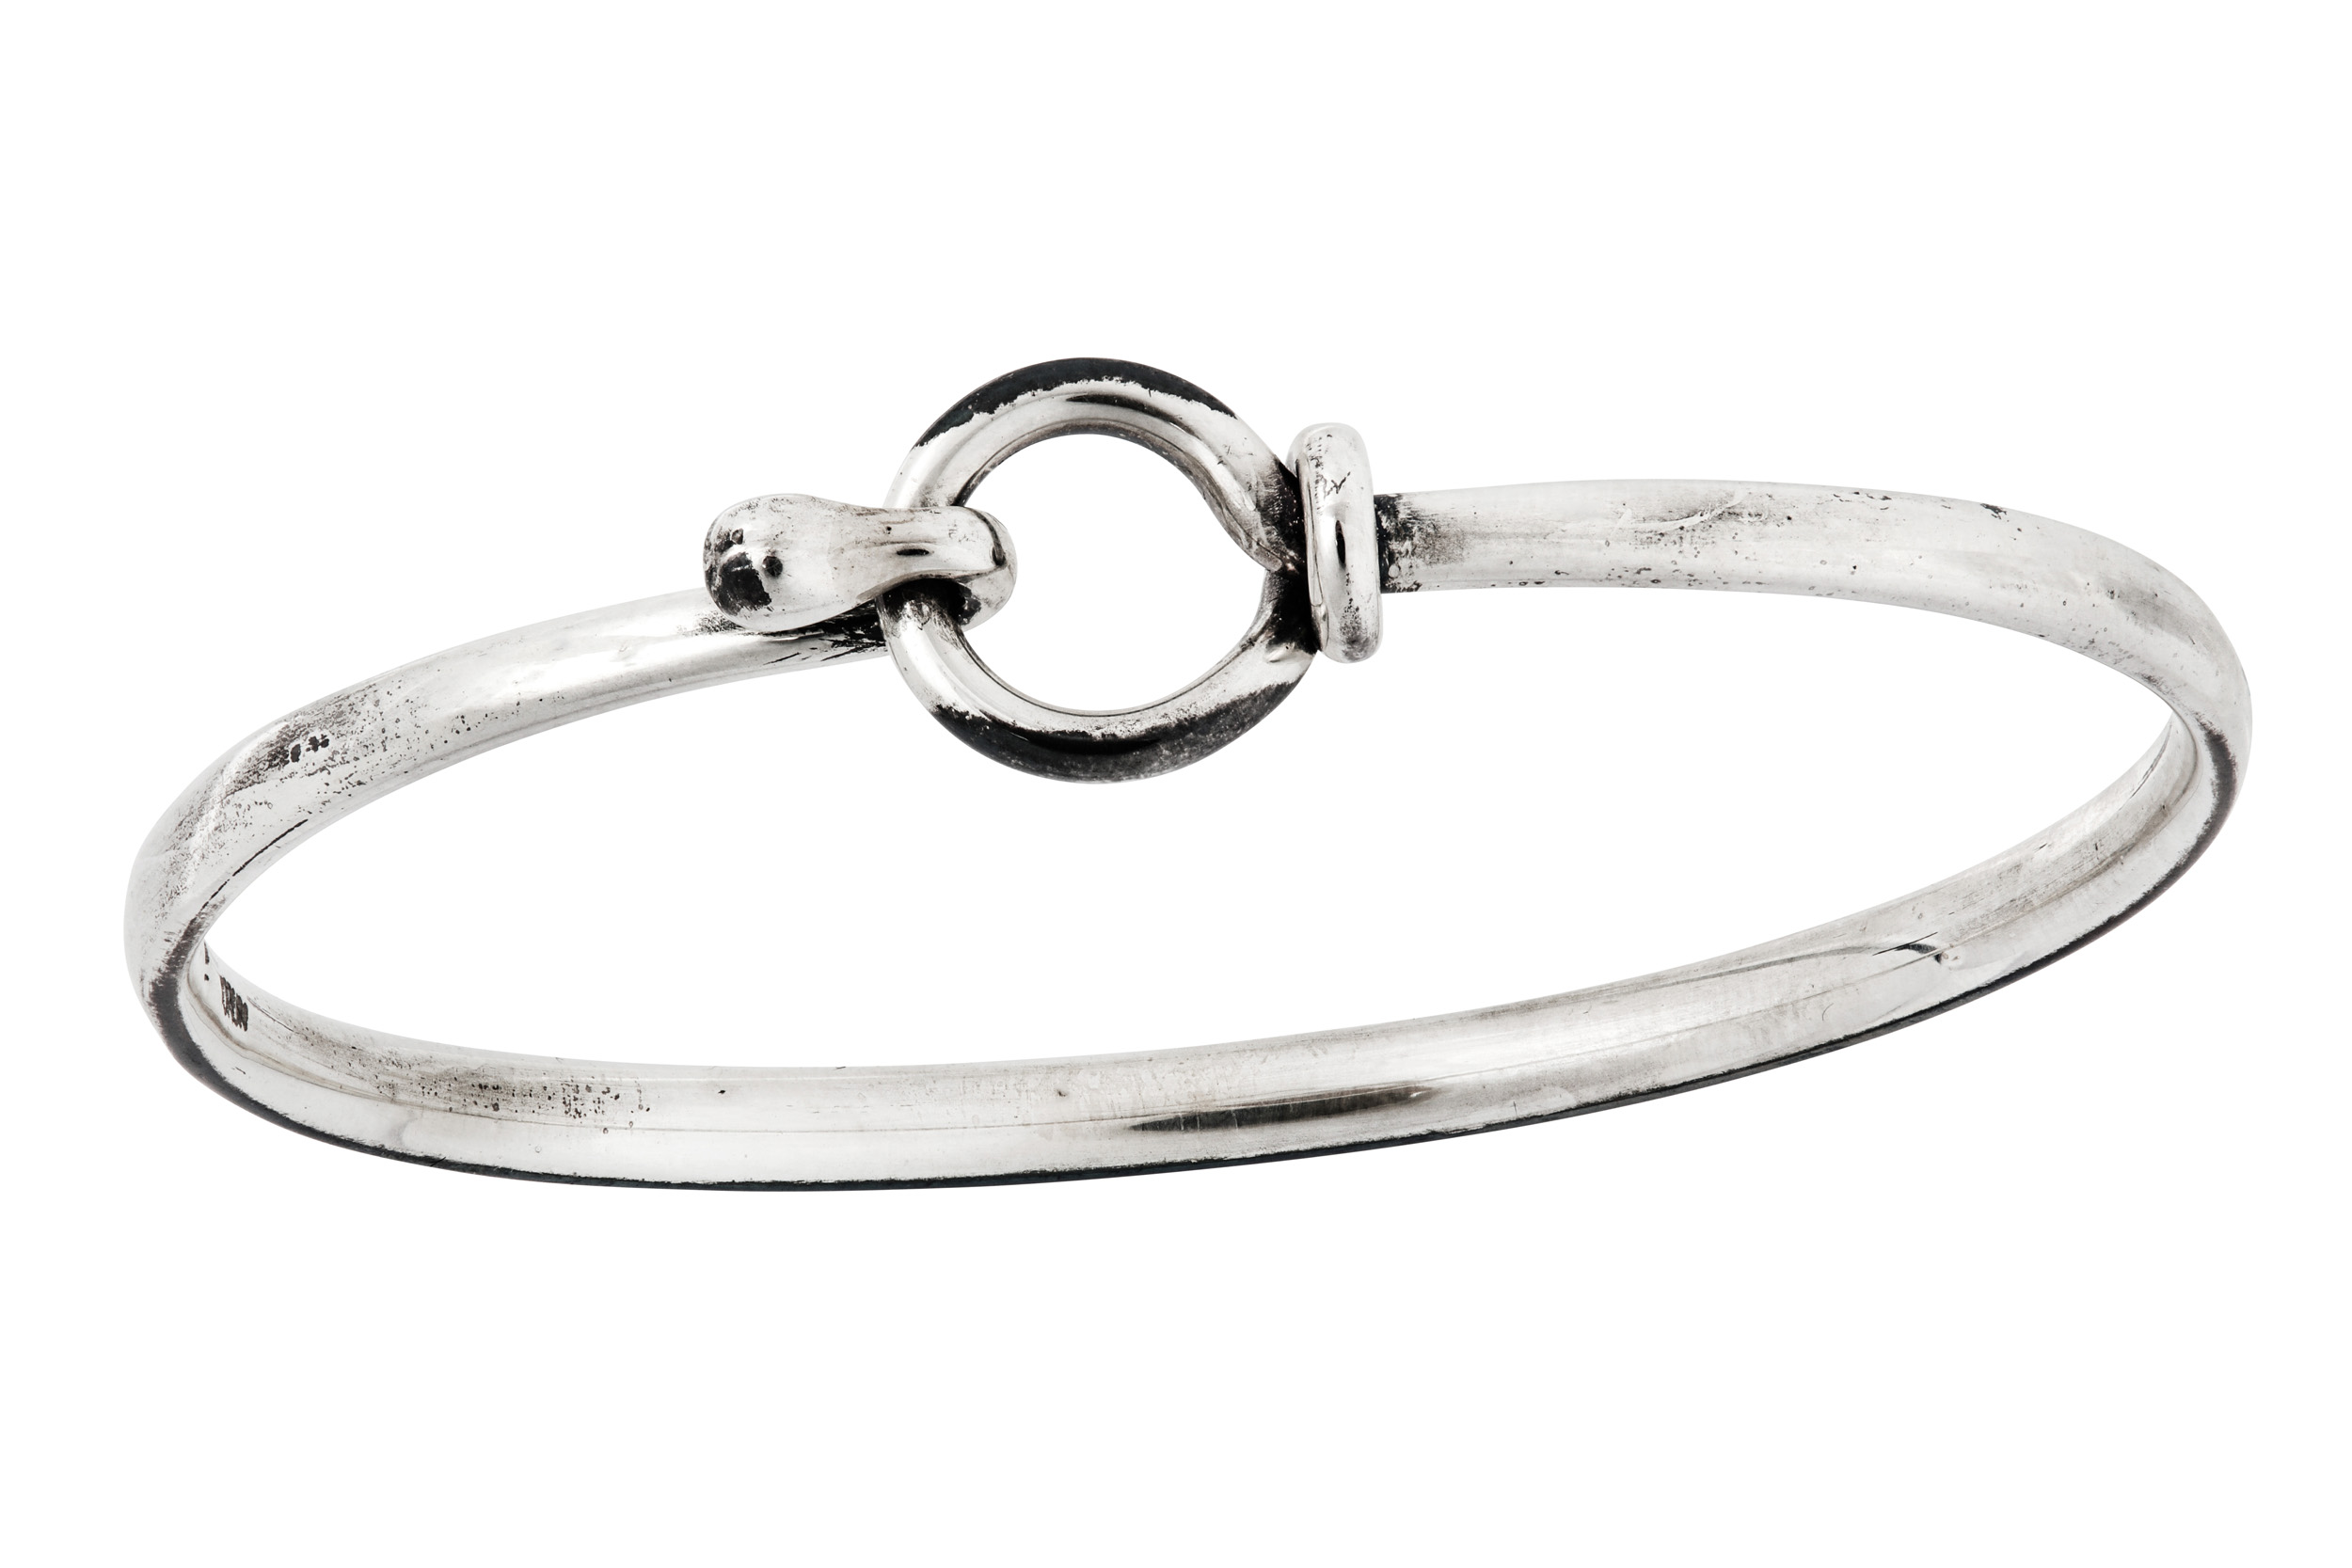 A 'Plaza' ring, by Henning Koppel and a bangle by Vivianna Tourn Bulow-Hube for Georg Jensen - Image 4 of 4